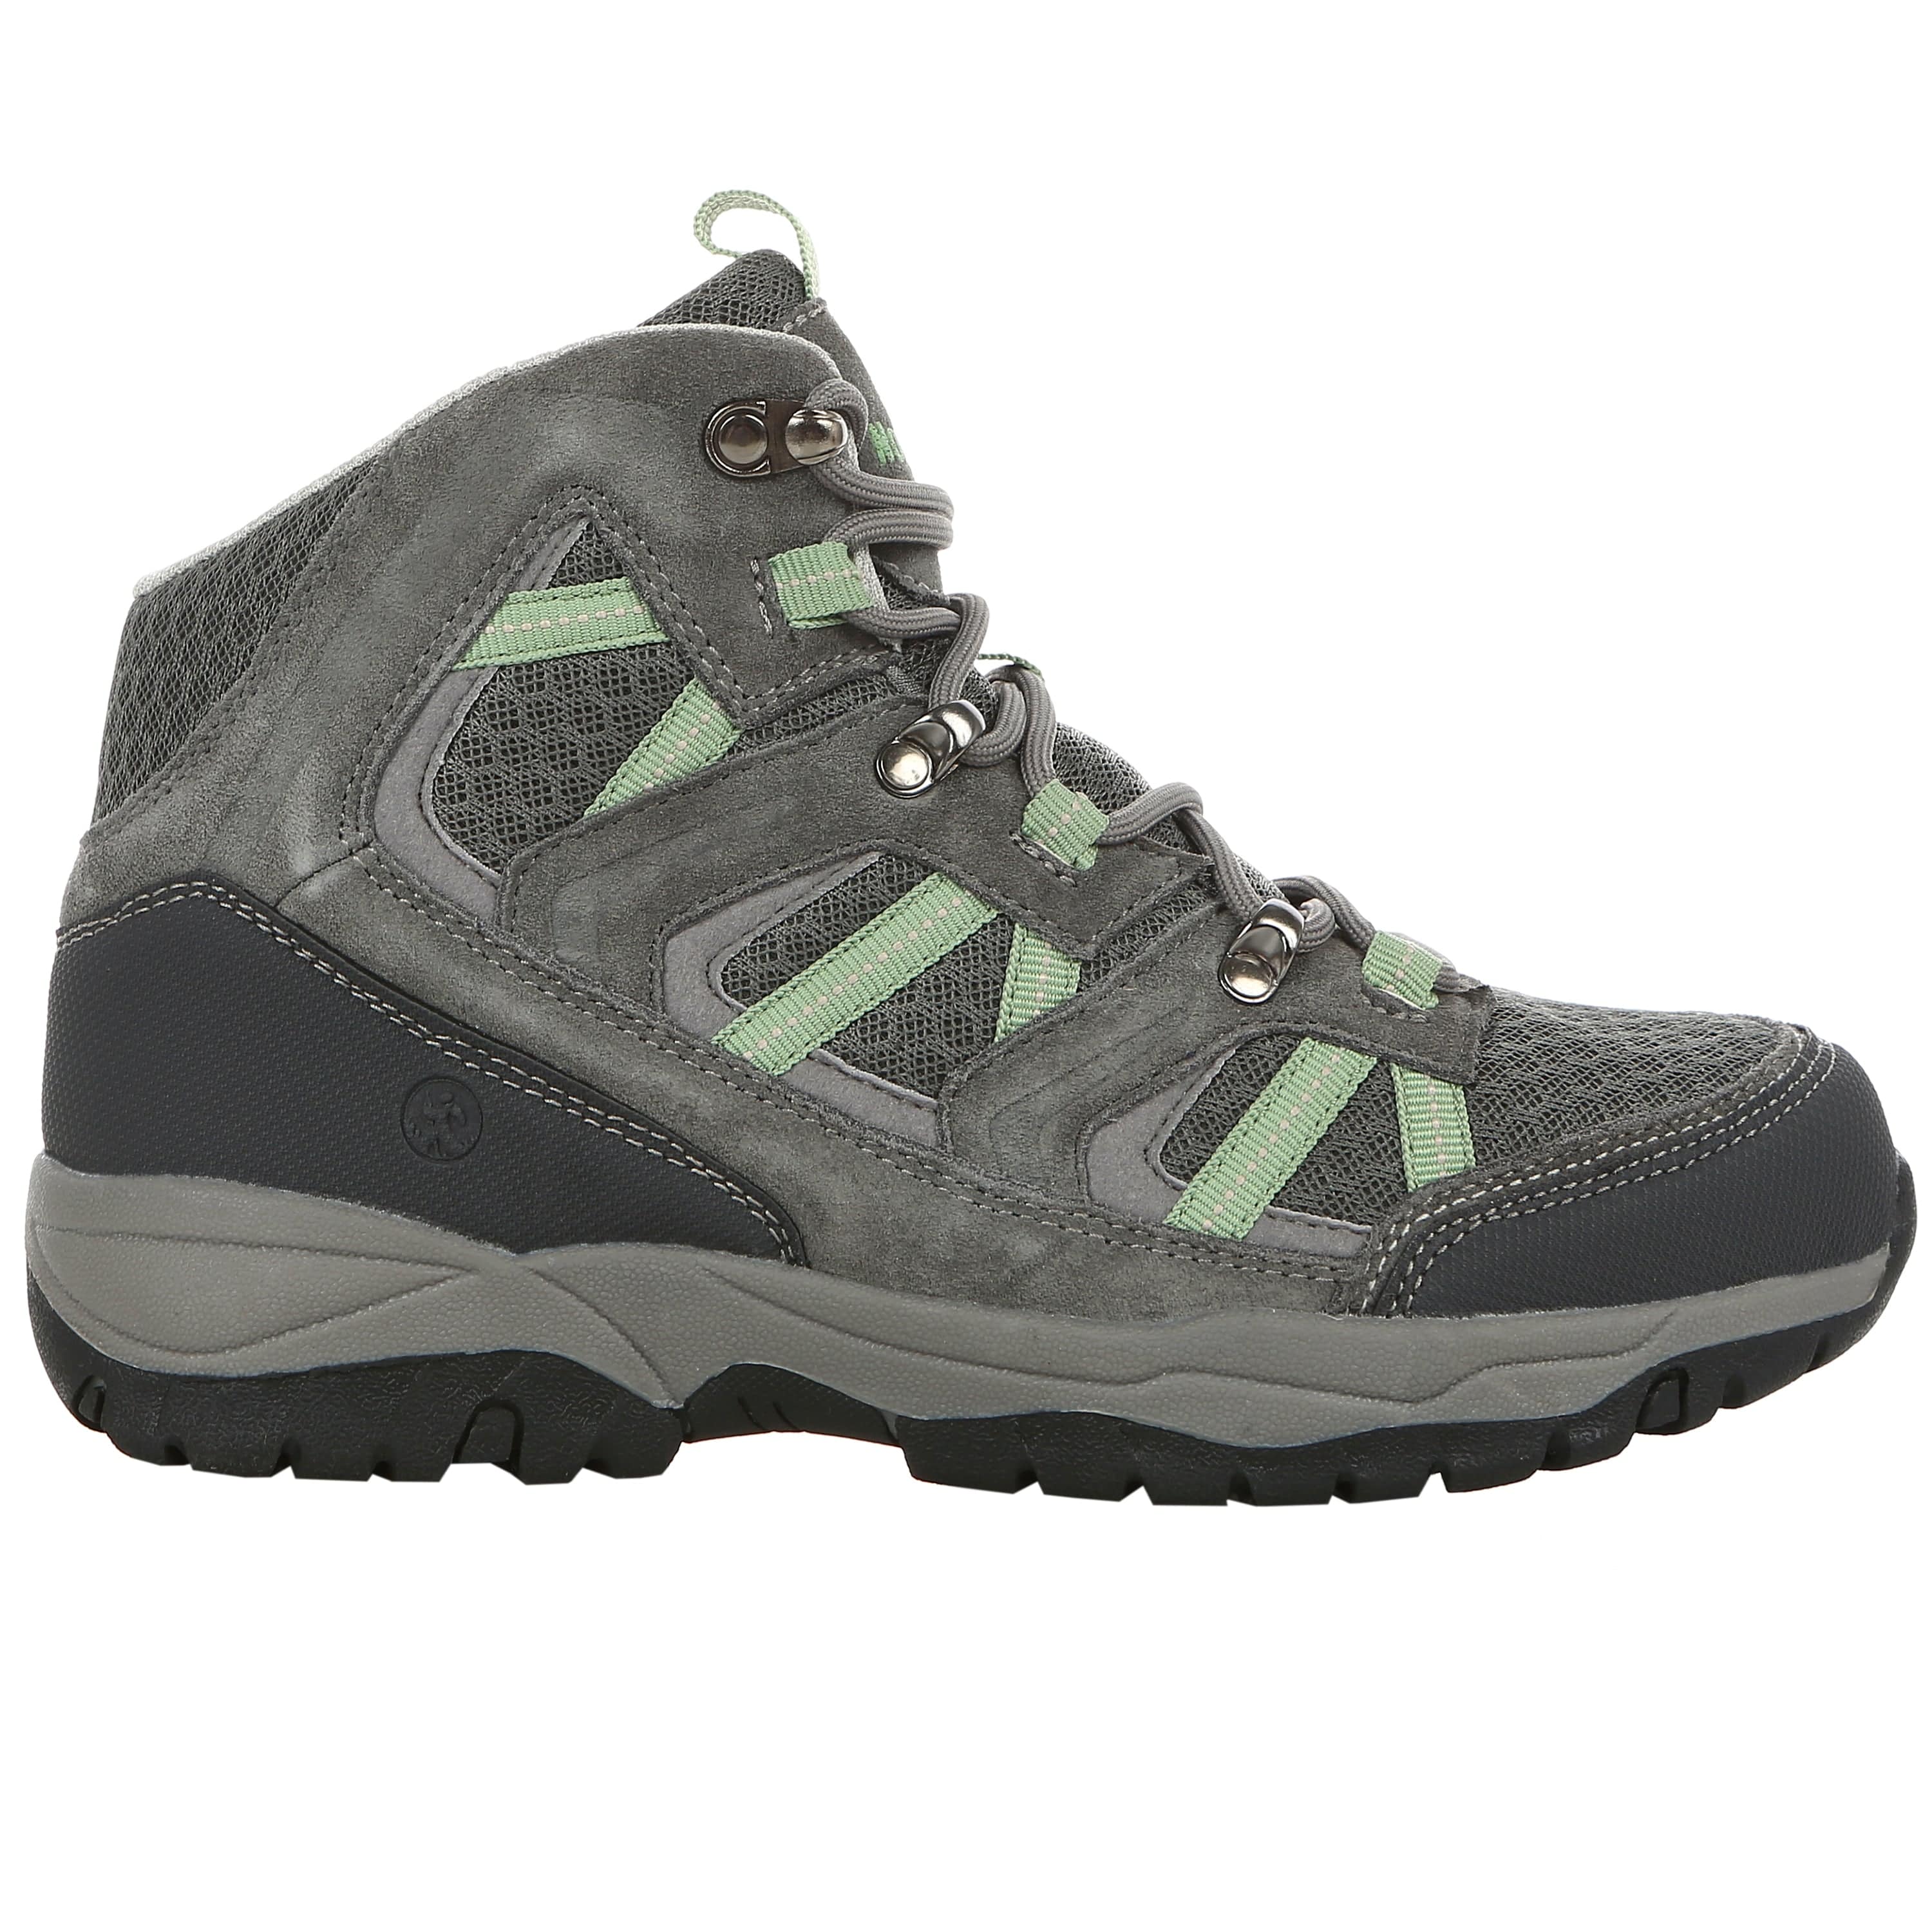 Women's Arlow Canyon Mid Hiking Boot - Northside USA